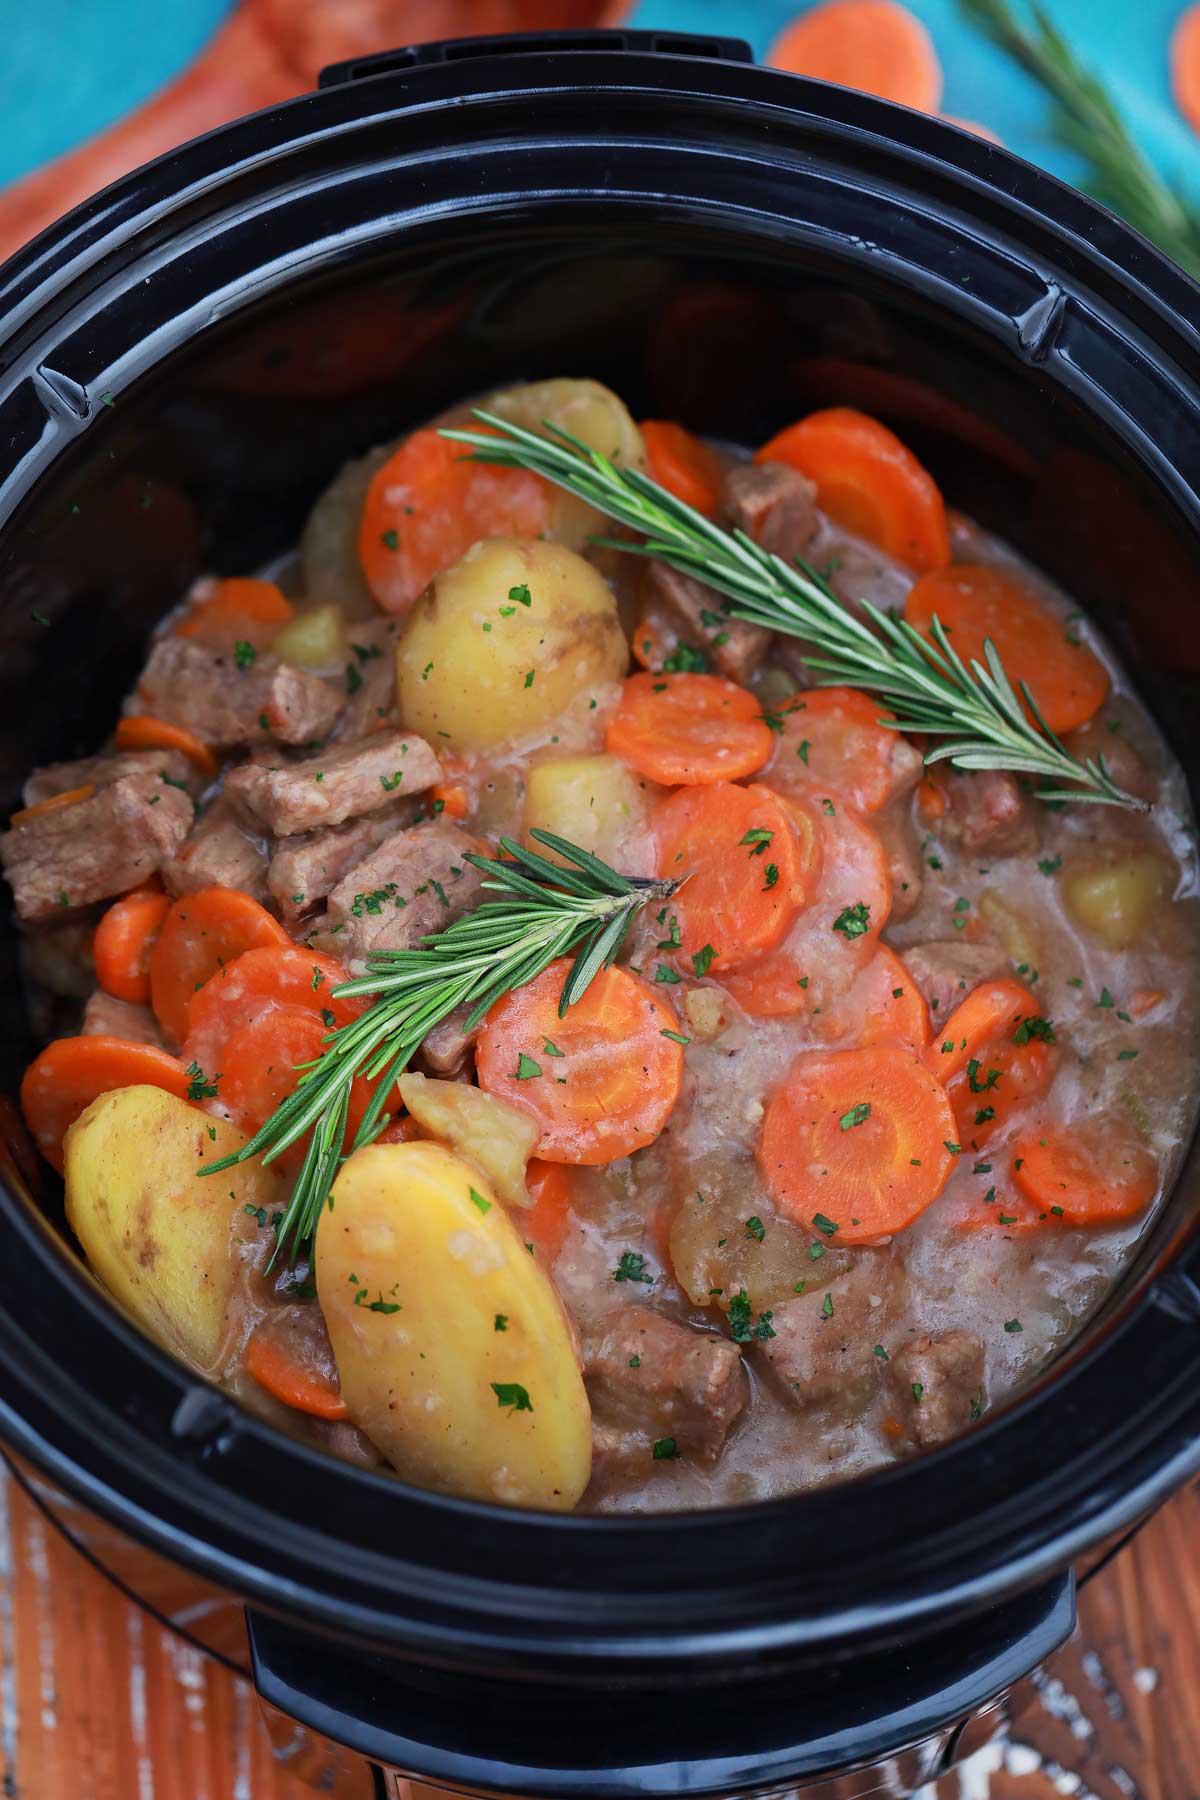 Cooked stew in slow cooker